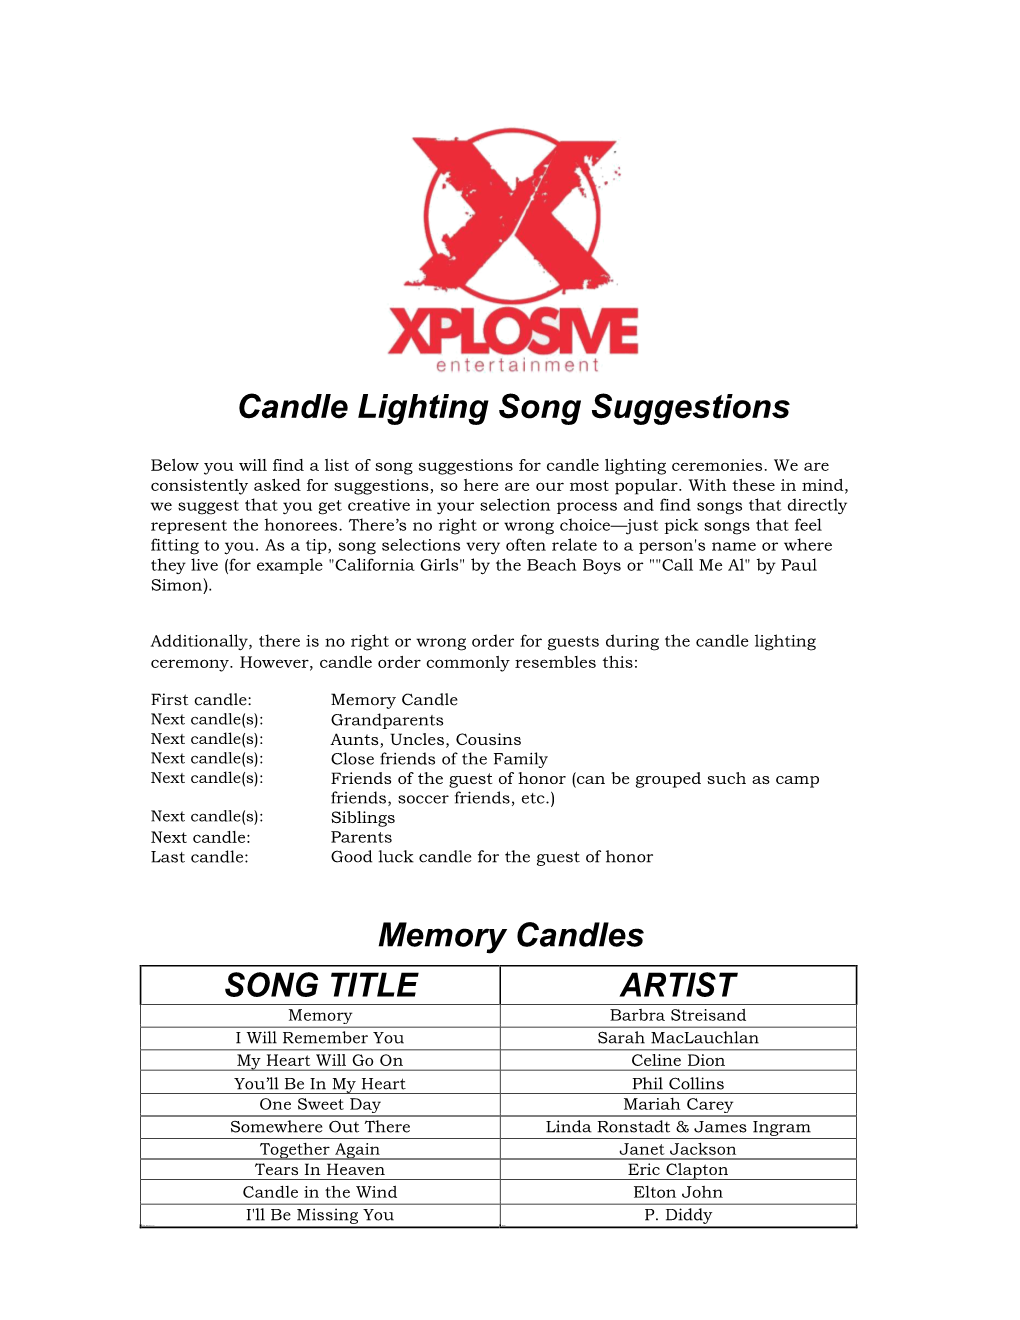 Candle Lighting Song Suggestions Memory Candles SONG TITLE